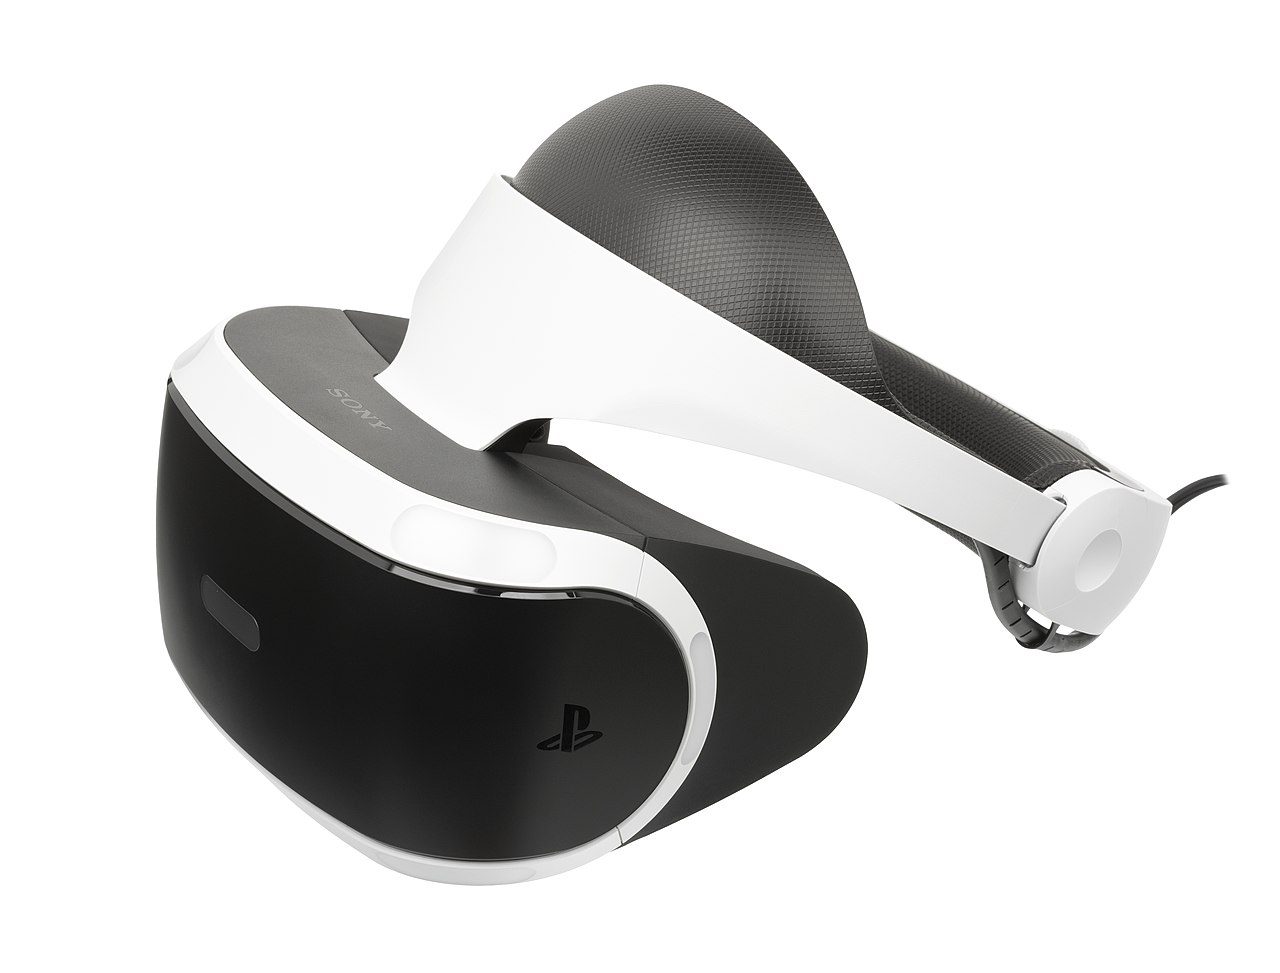 game console VR headset Sony